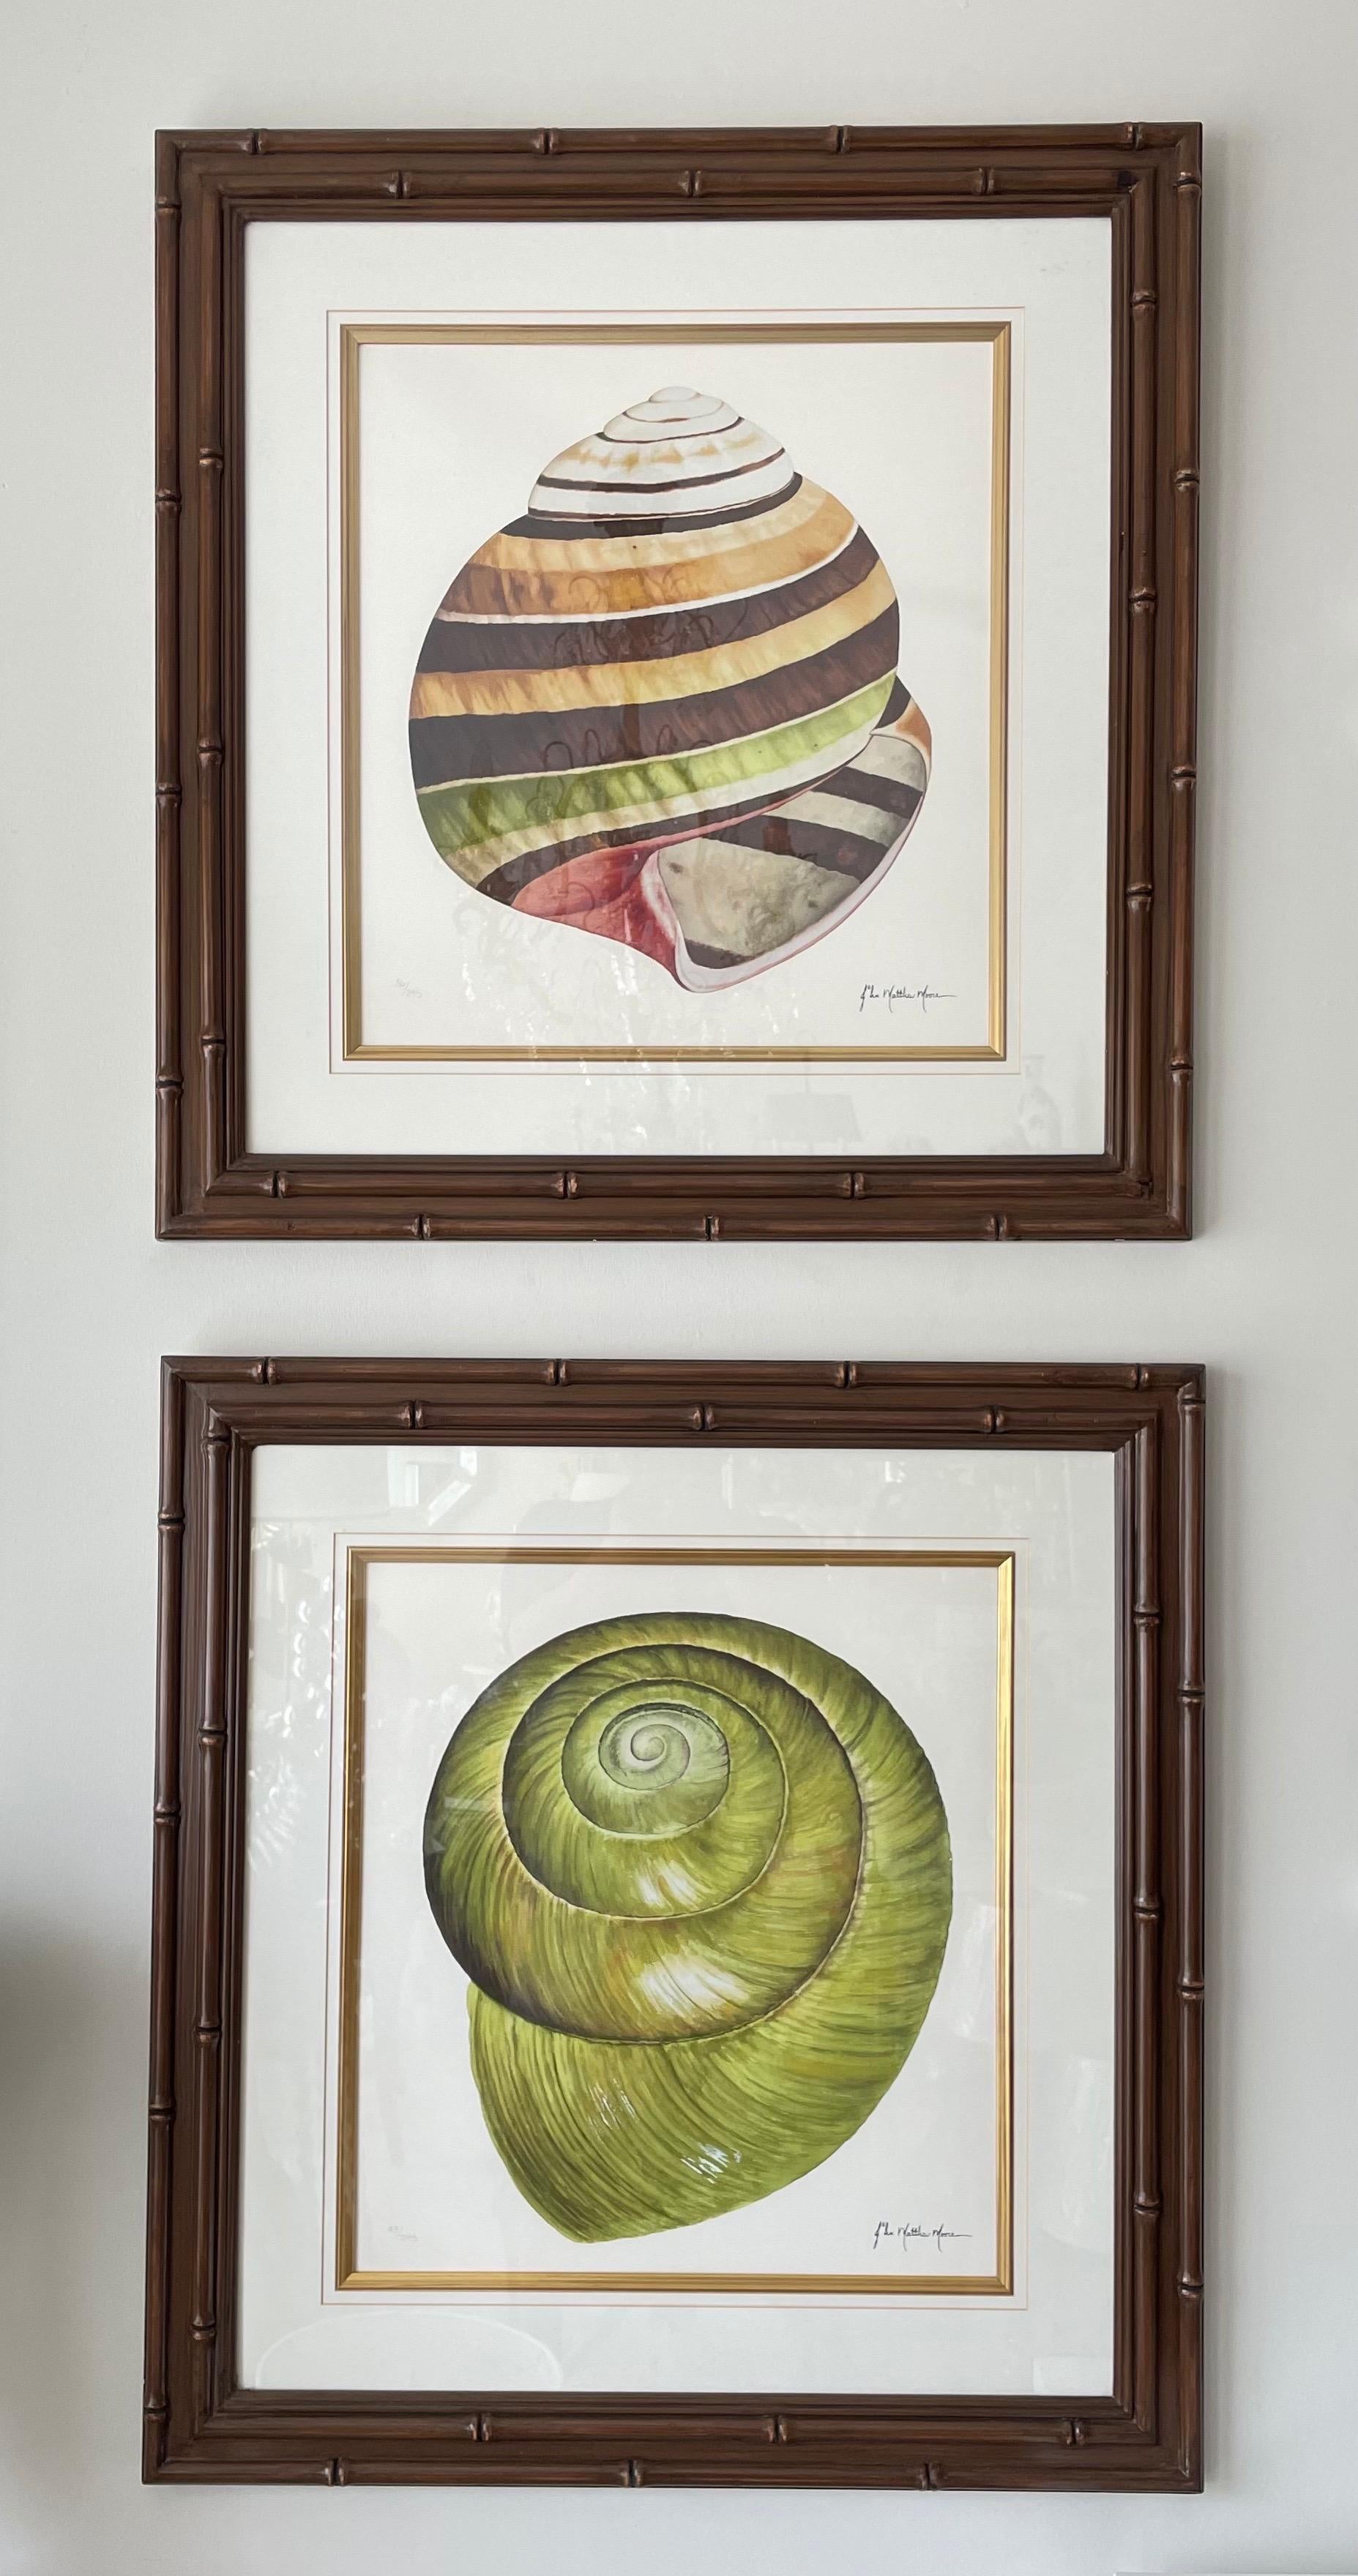 Pair of limited edition shell lithographs by John Matthew Moore. Each piece is signed & numbered.